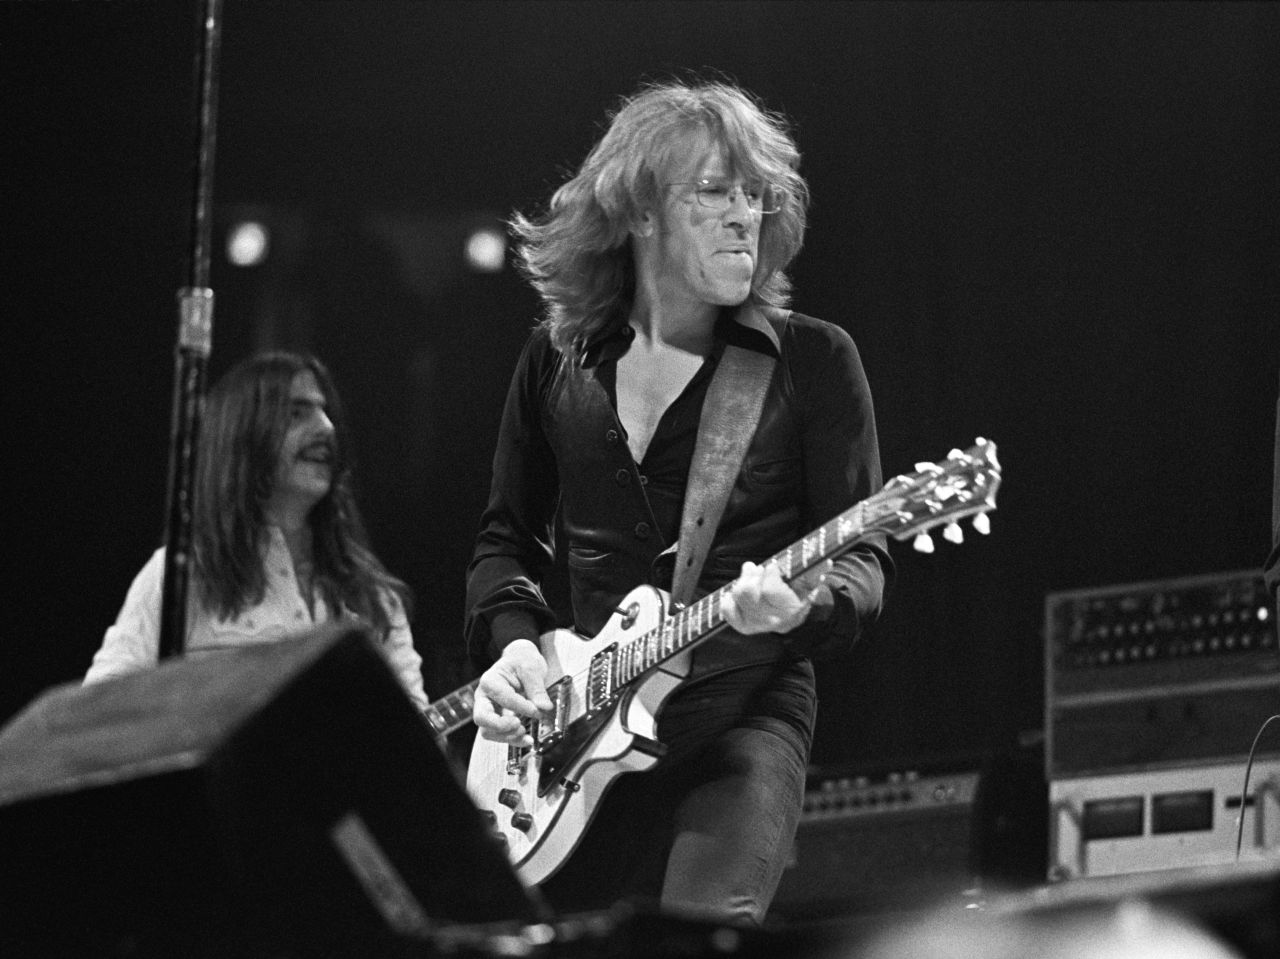 <a href="http://www.cnn.com/2016/01/29/entertainment/jefferson-airplane-guitarist-dies/index.html">Paul Kantner</a>, a guitarist in the '60s psychedelic rock band Jefferson Airplane and its successor, Jefferson Starship, died on January 28. He was 74.